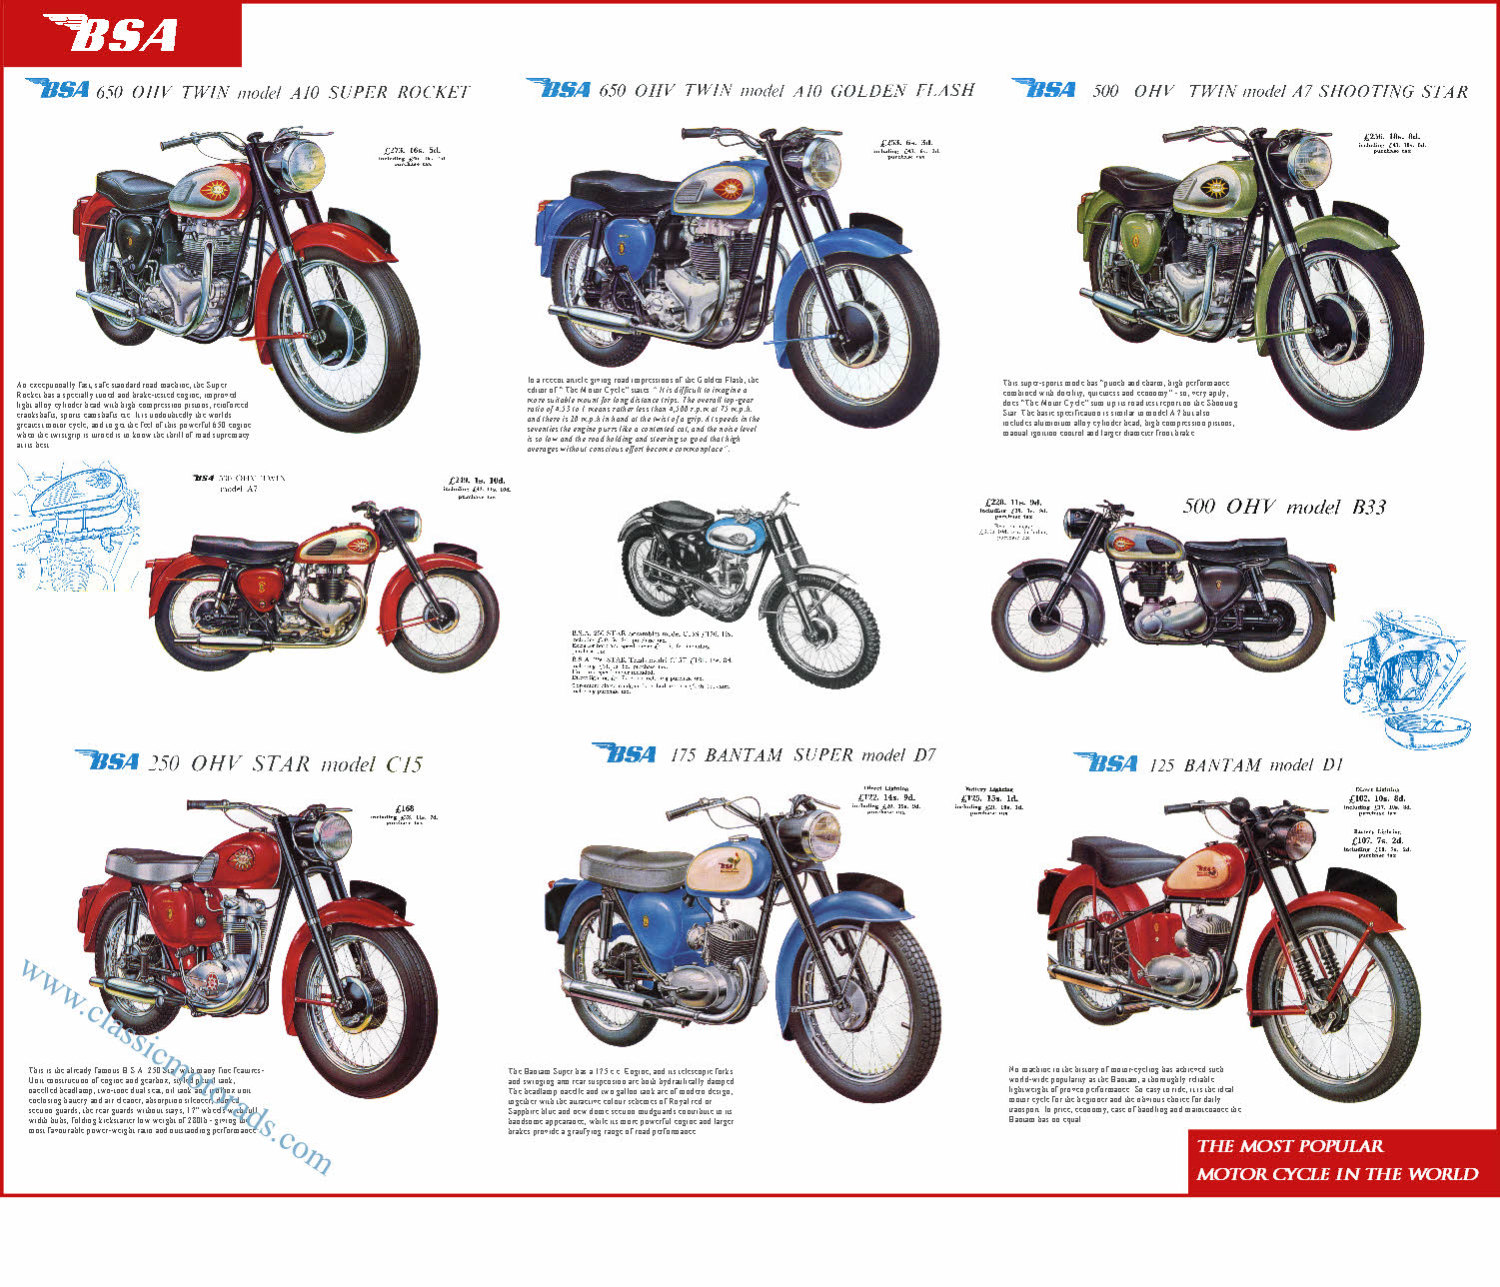 Classic BSA Motorcycle Poster reproduced from the original